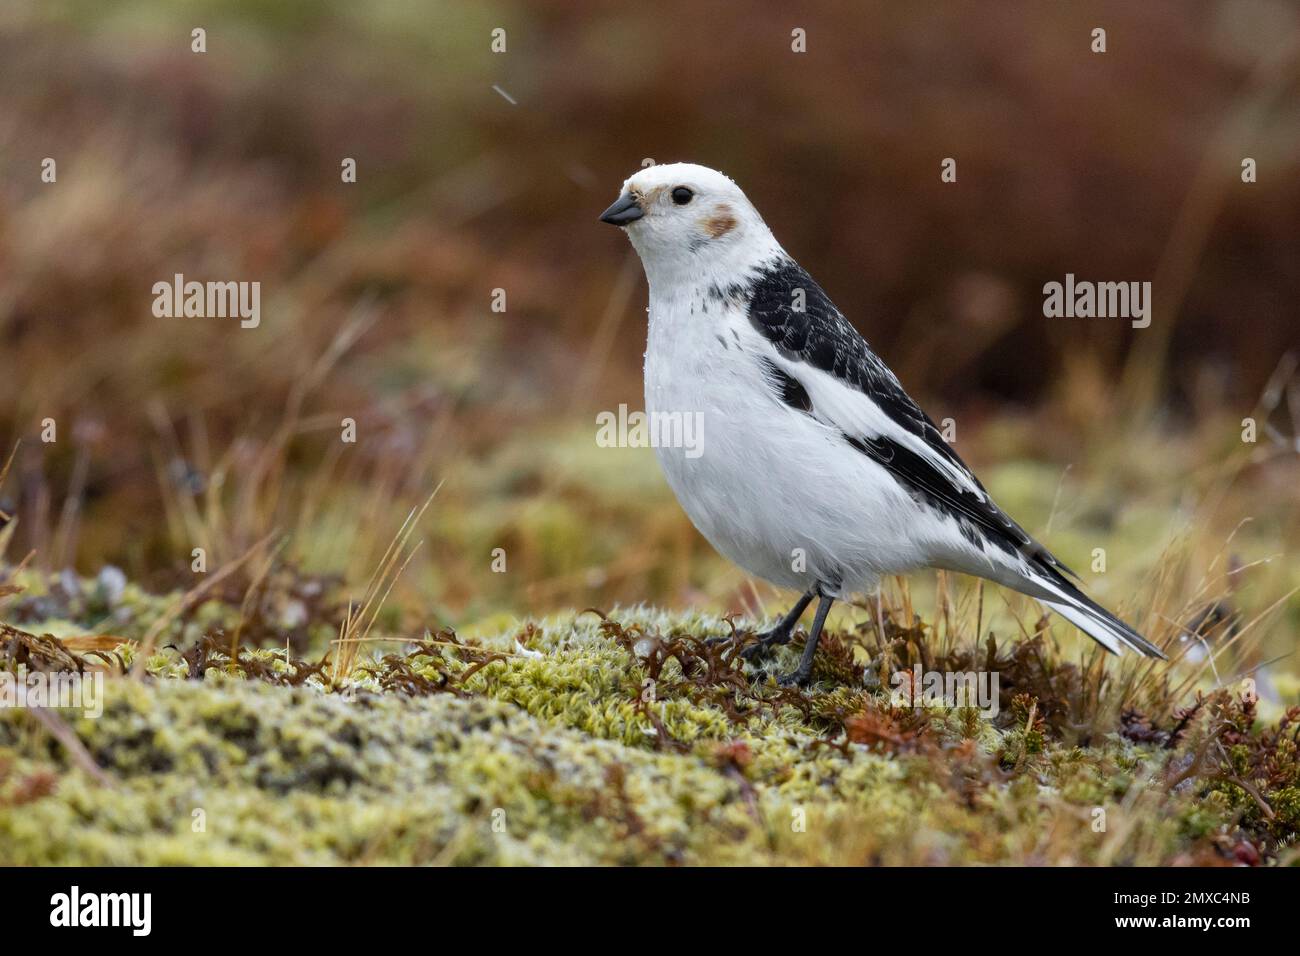 Snow Bunting (Plectrophenax nivalis insulae), side view of an adult male standing on some moss, Northeastern Region, Iceland Stock Photo